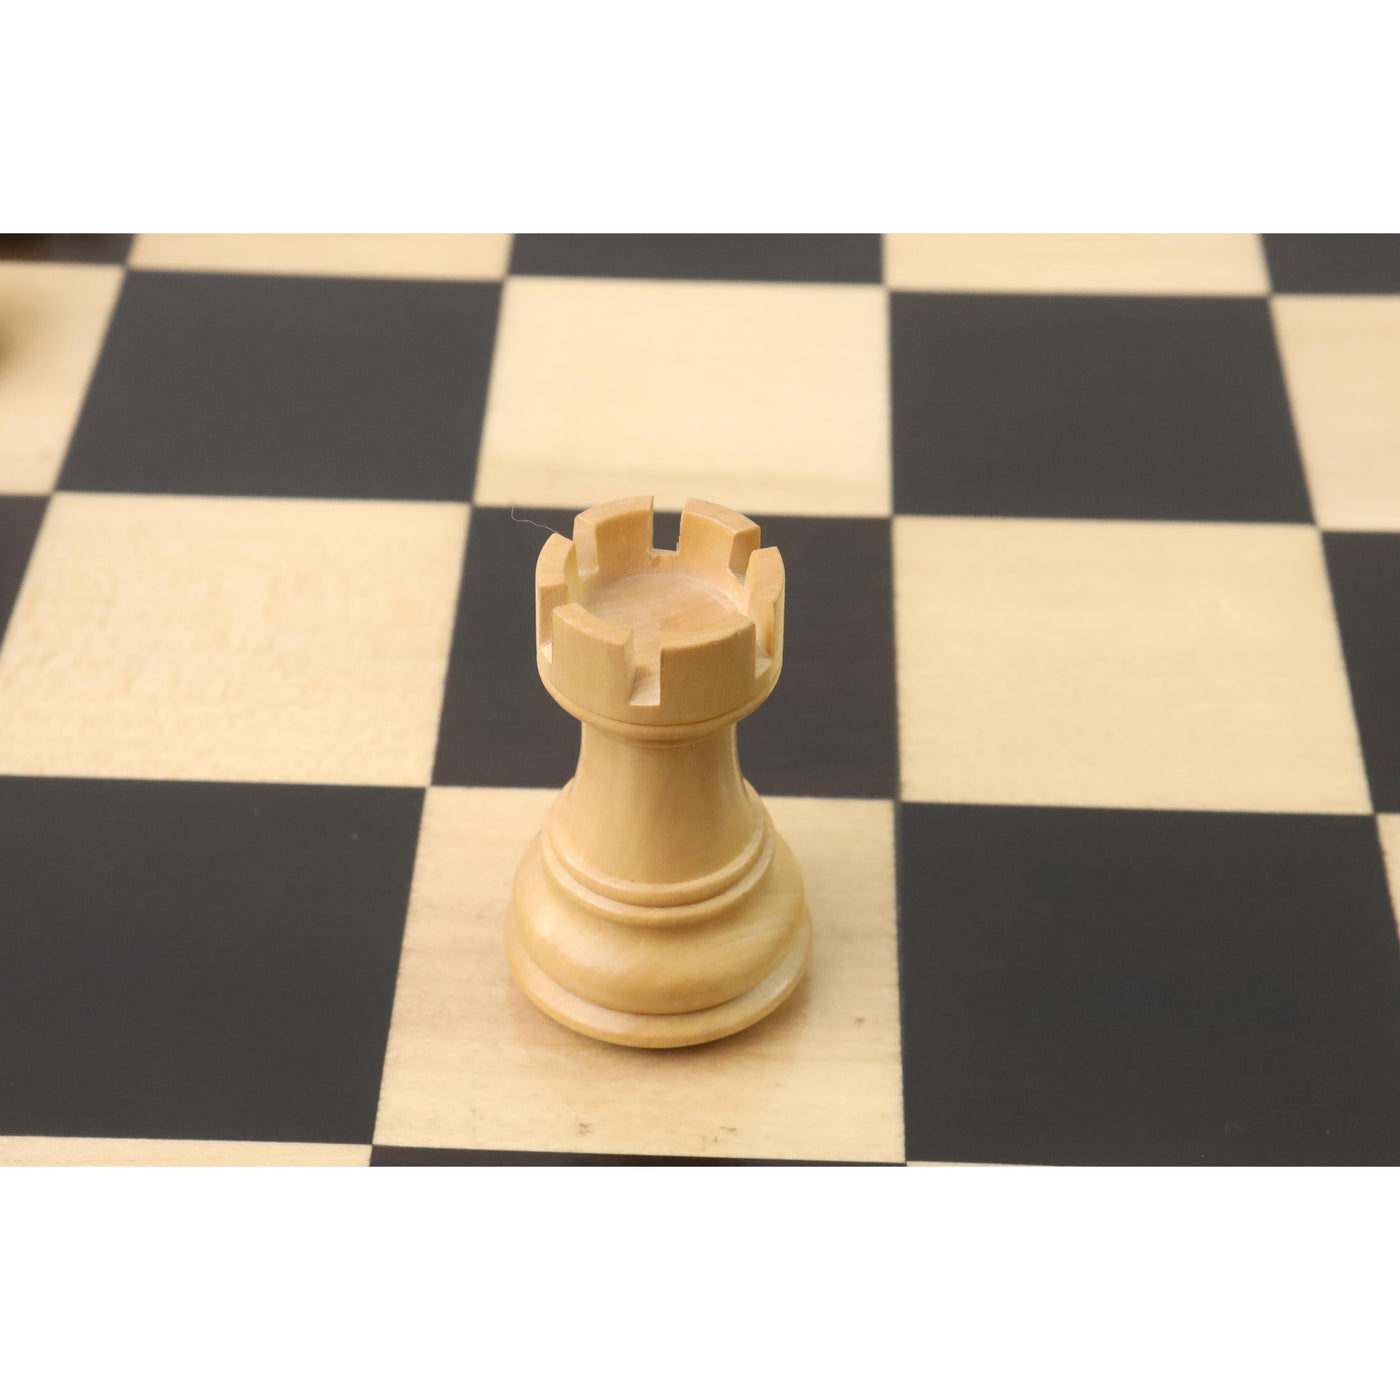 3.1" Russian Zagreb Chess Set - Chess Pieces Only - Weighted Ebonised Boxwood